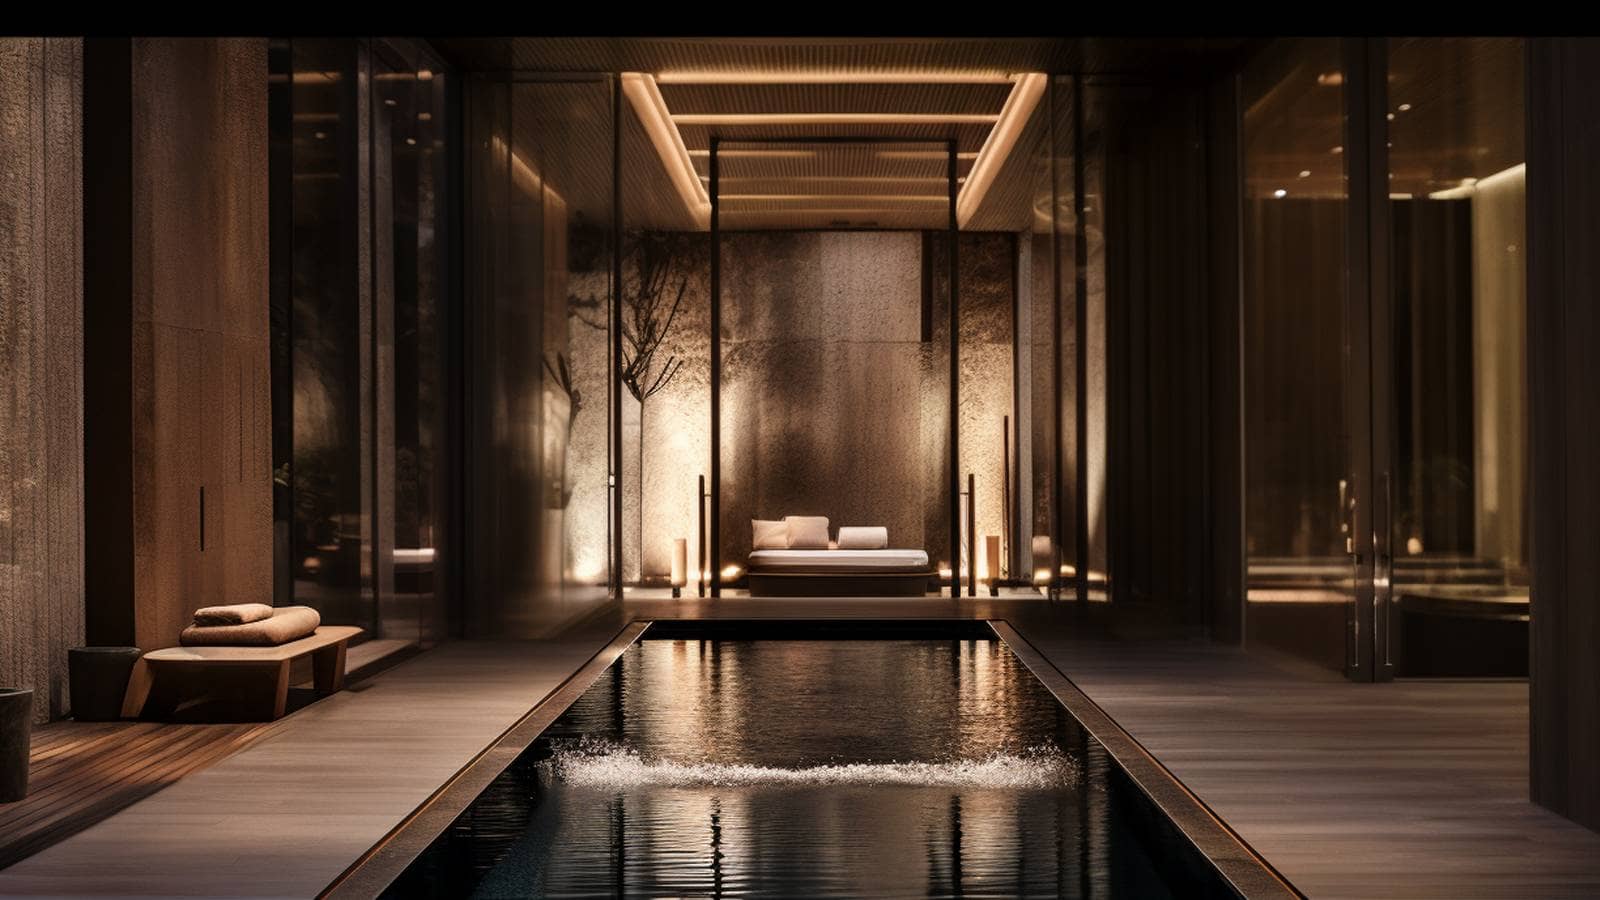 Luxury private Wellness SPA by architects Vielliard and Francheteau